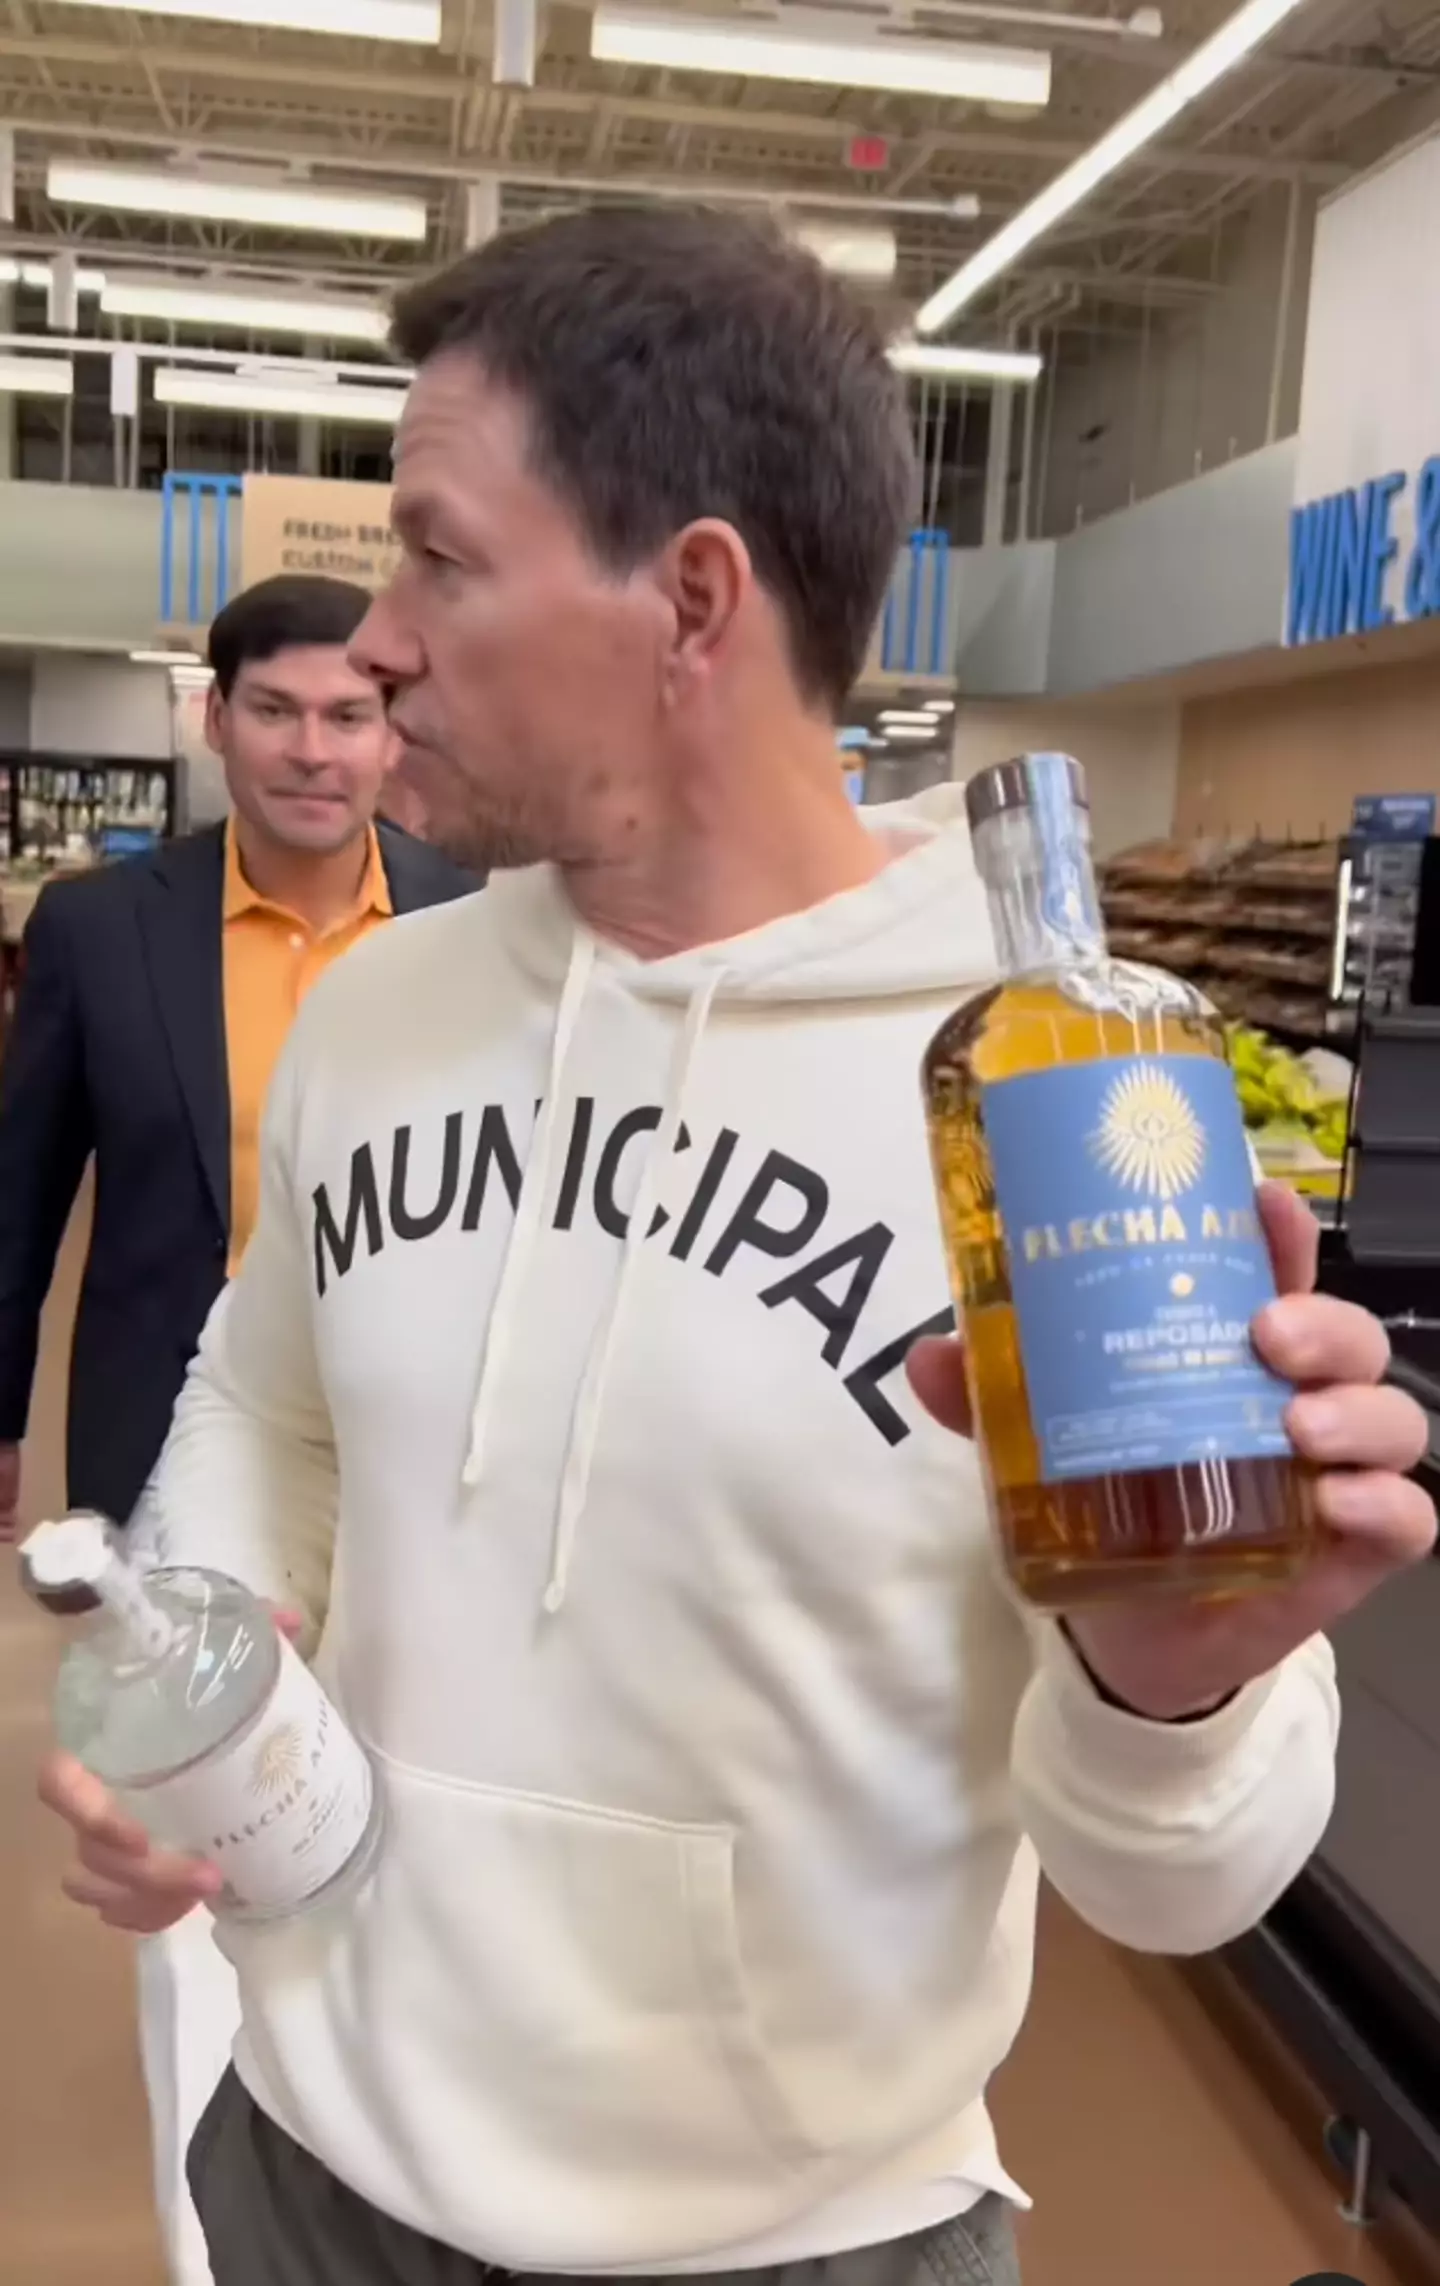 Wahlberg promoted the arrival of a new tequila in stores.